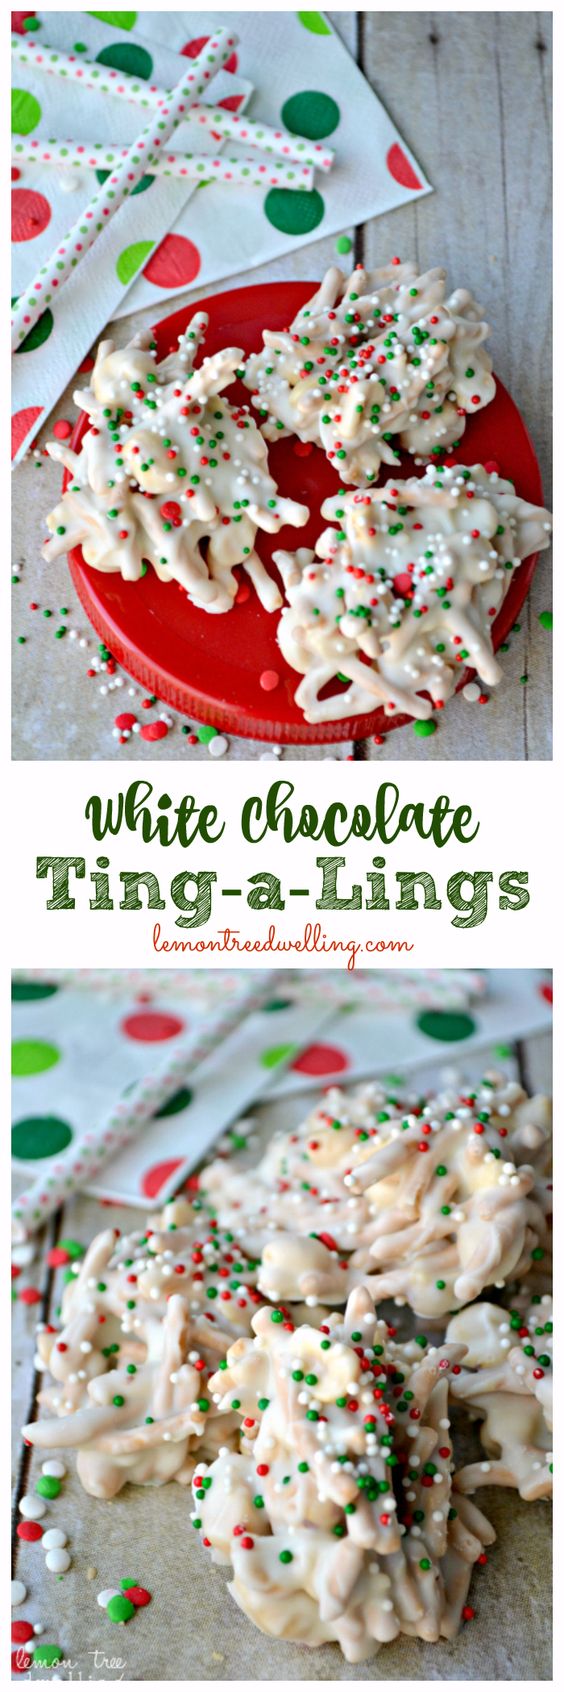 Christmas Cookies: White Chocolate Ting-a Lings